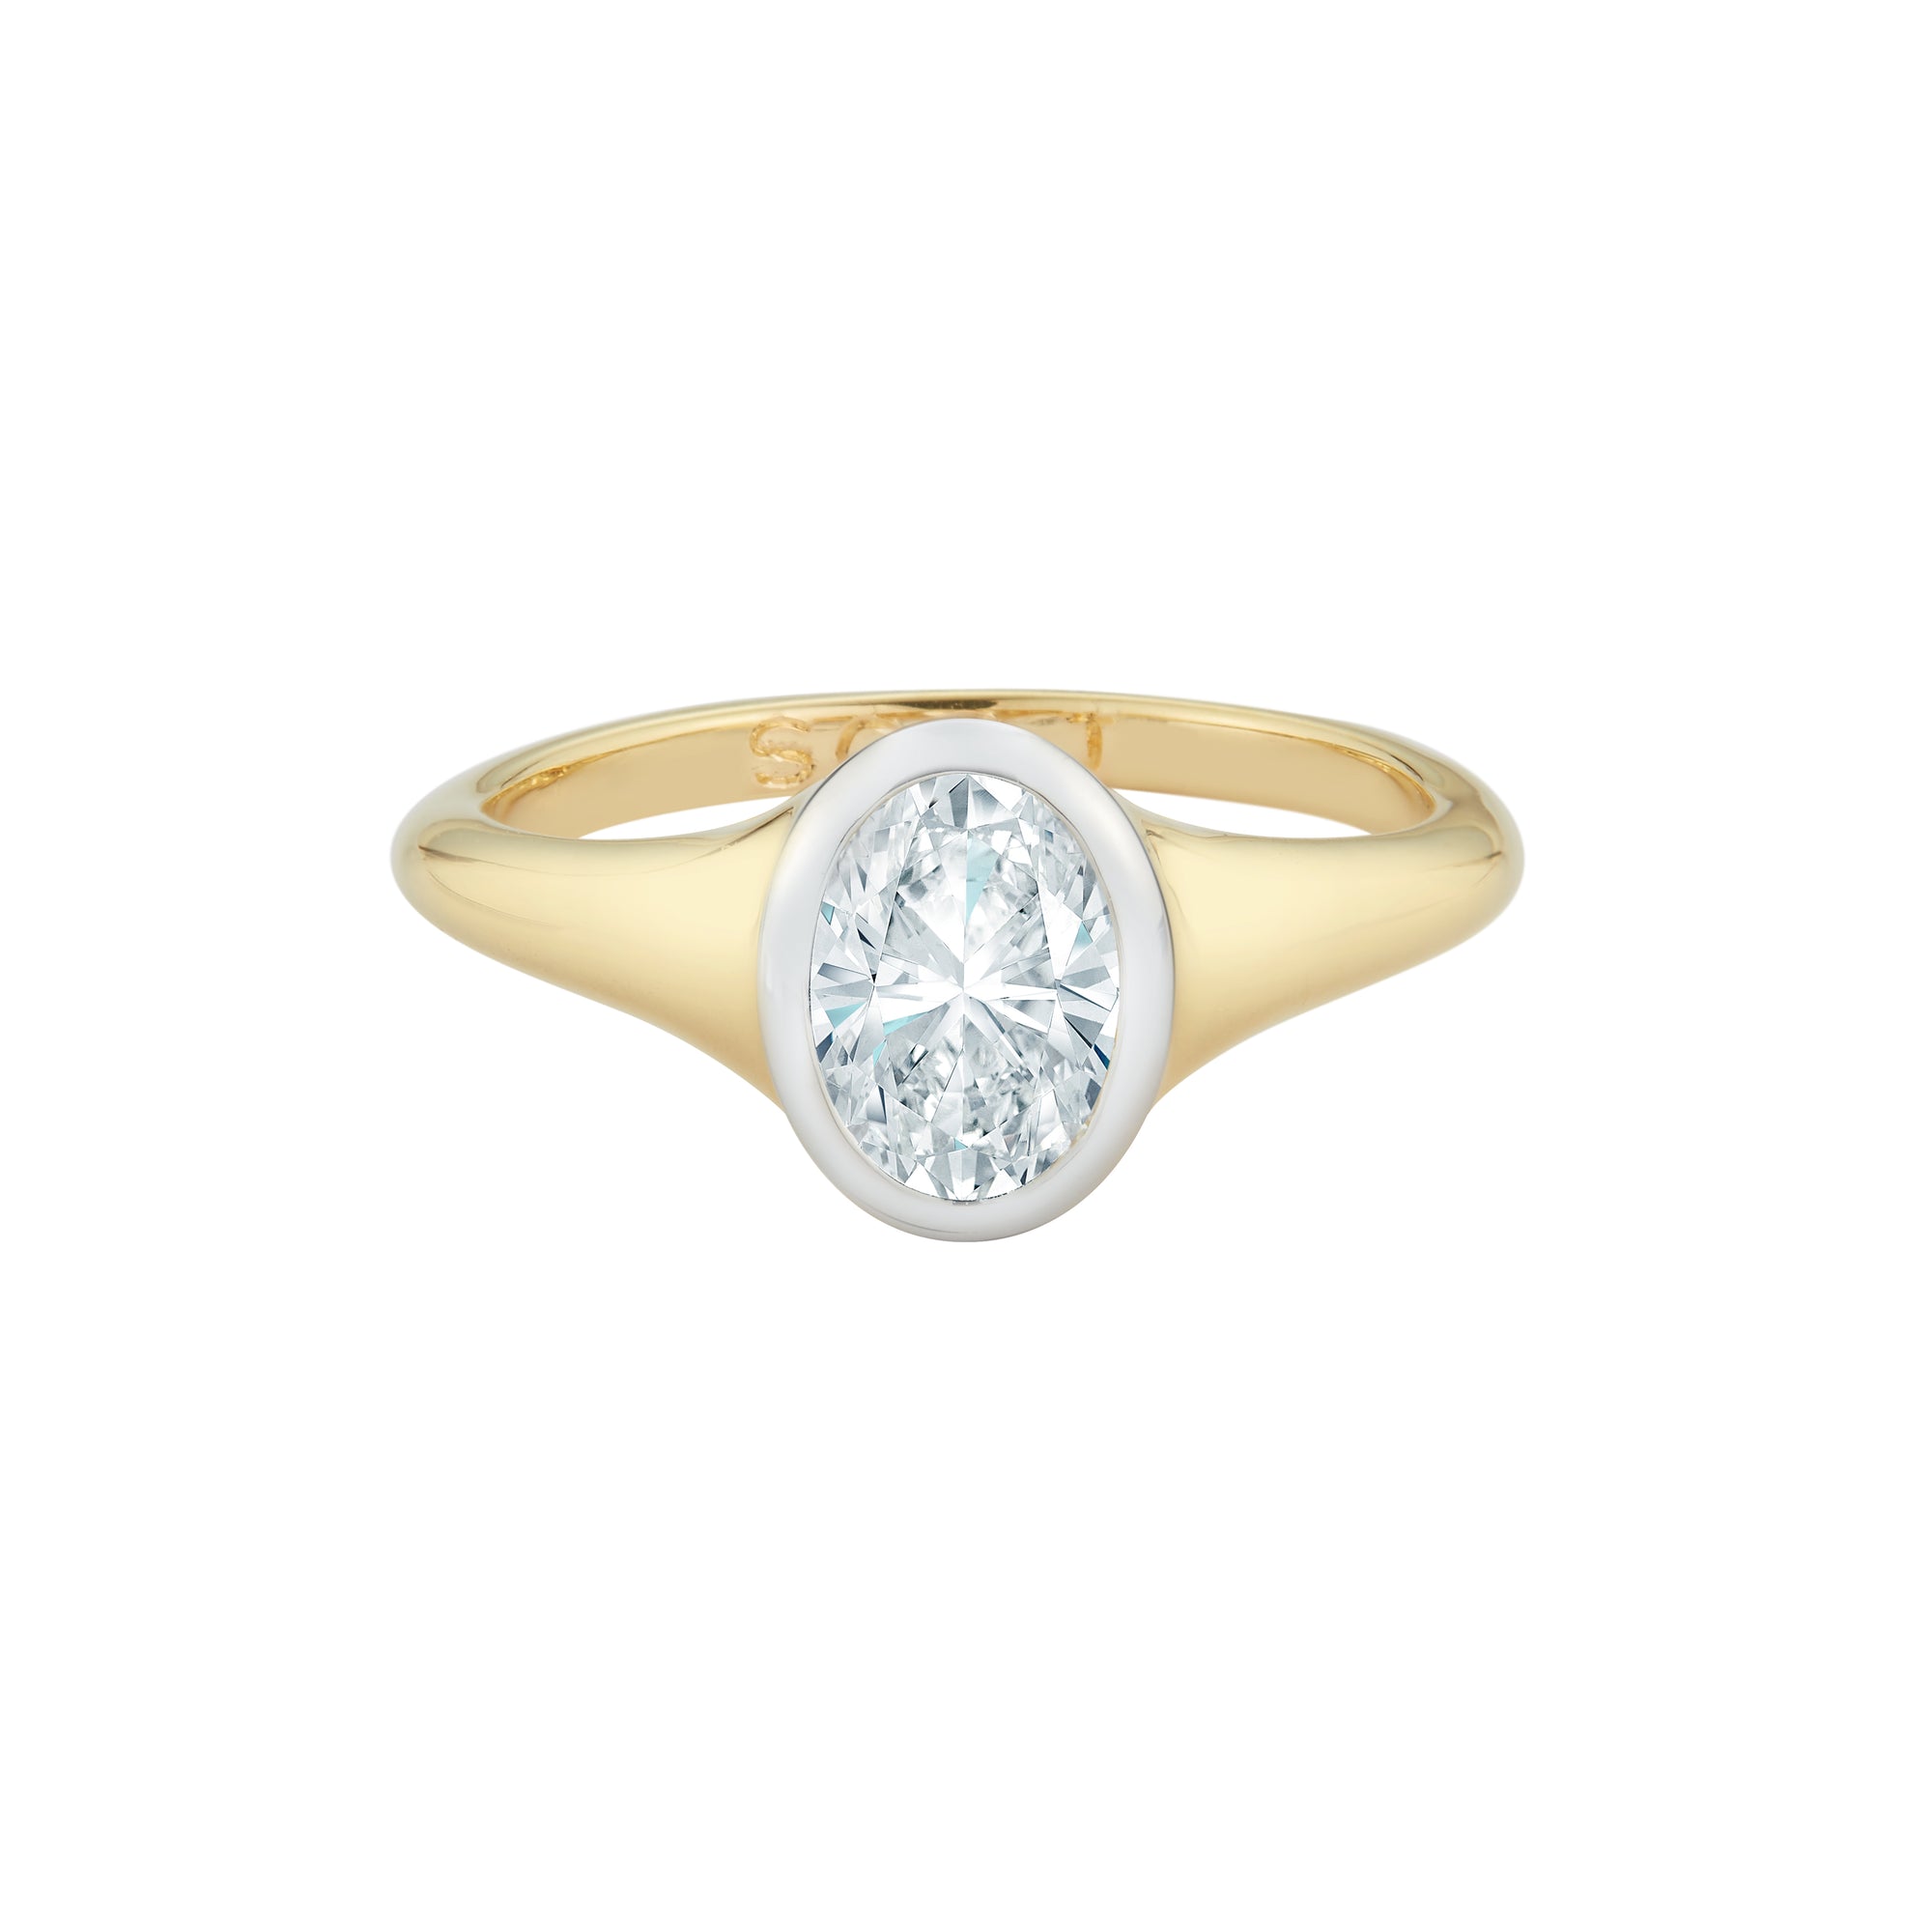 OVAL SOLARIS ENGAGEMENT RING